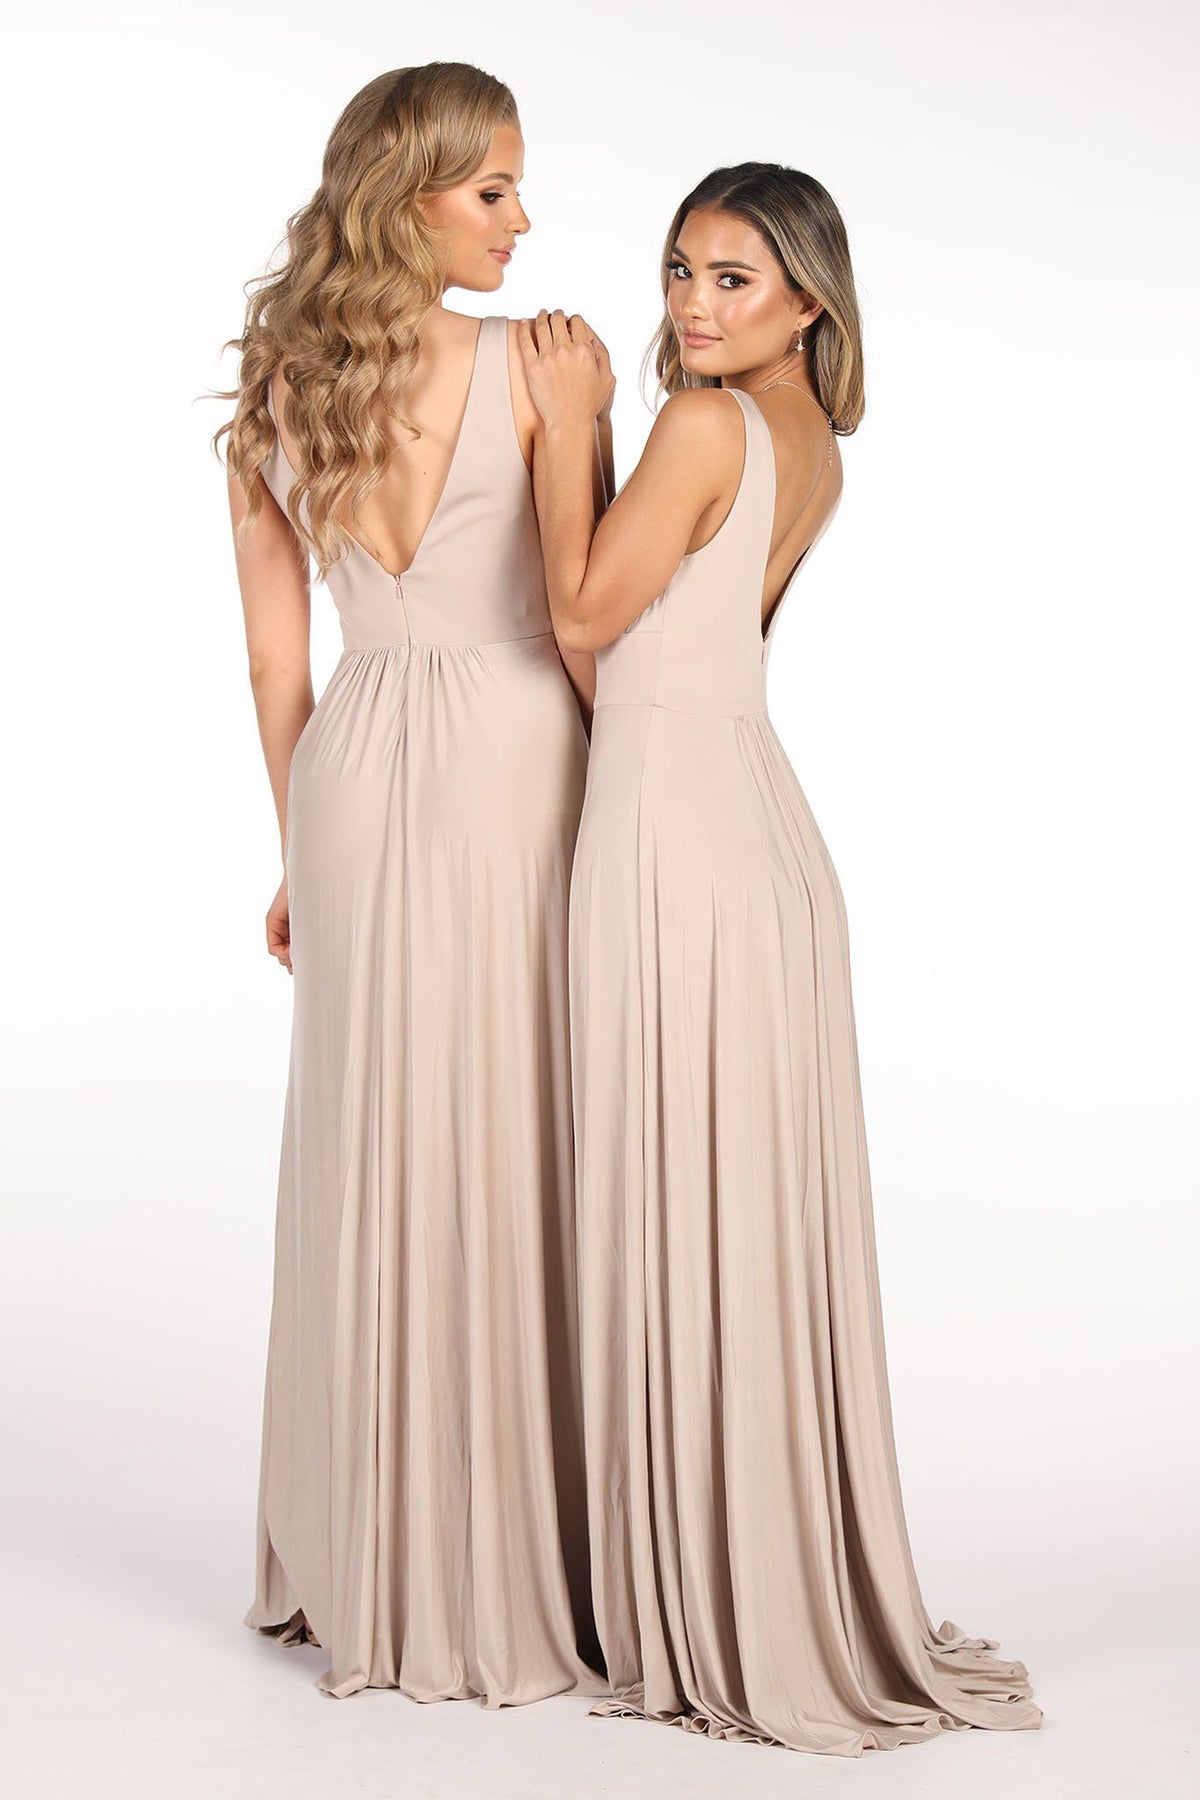 Low V-Back Design and Invisible Back Zip Closure of Nude Coloured Flowy Floor-Length Bridesmaid Dress featuring fitted V-Neckline Bodice, A-Line Skirt and Thigh-High Front Split